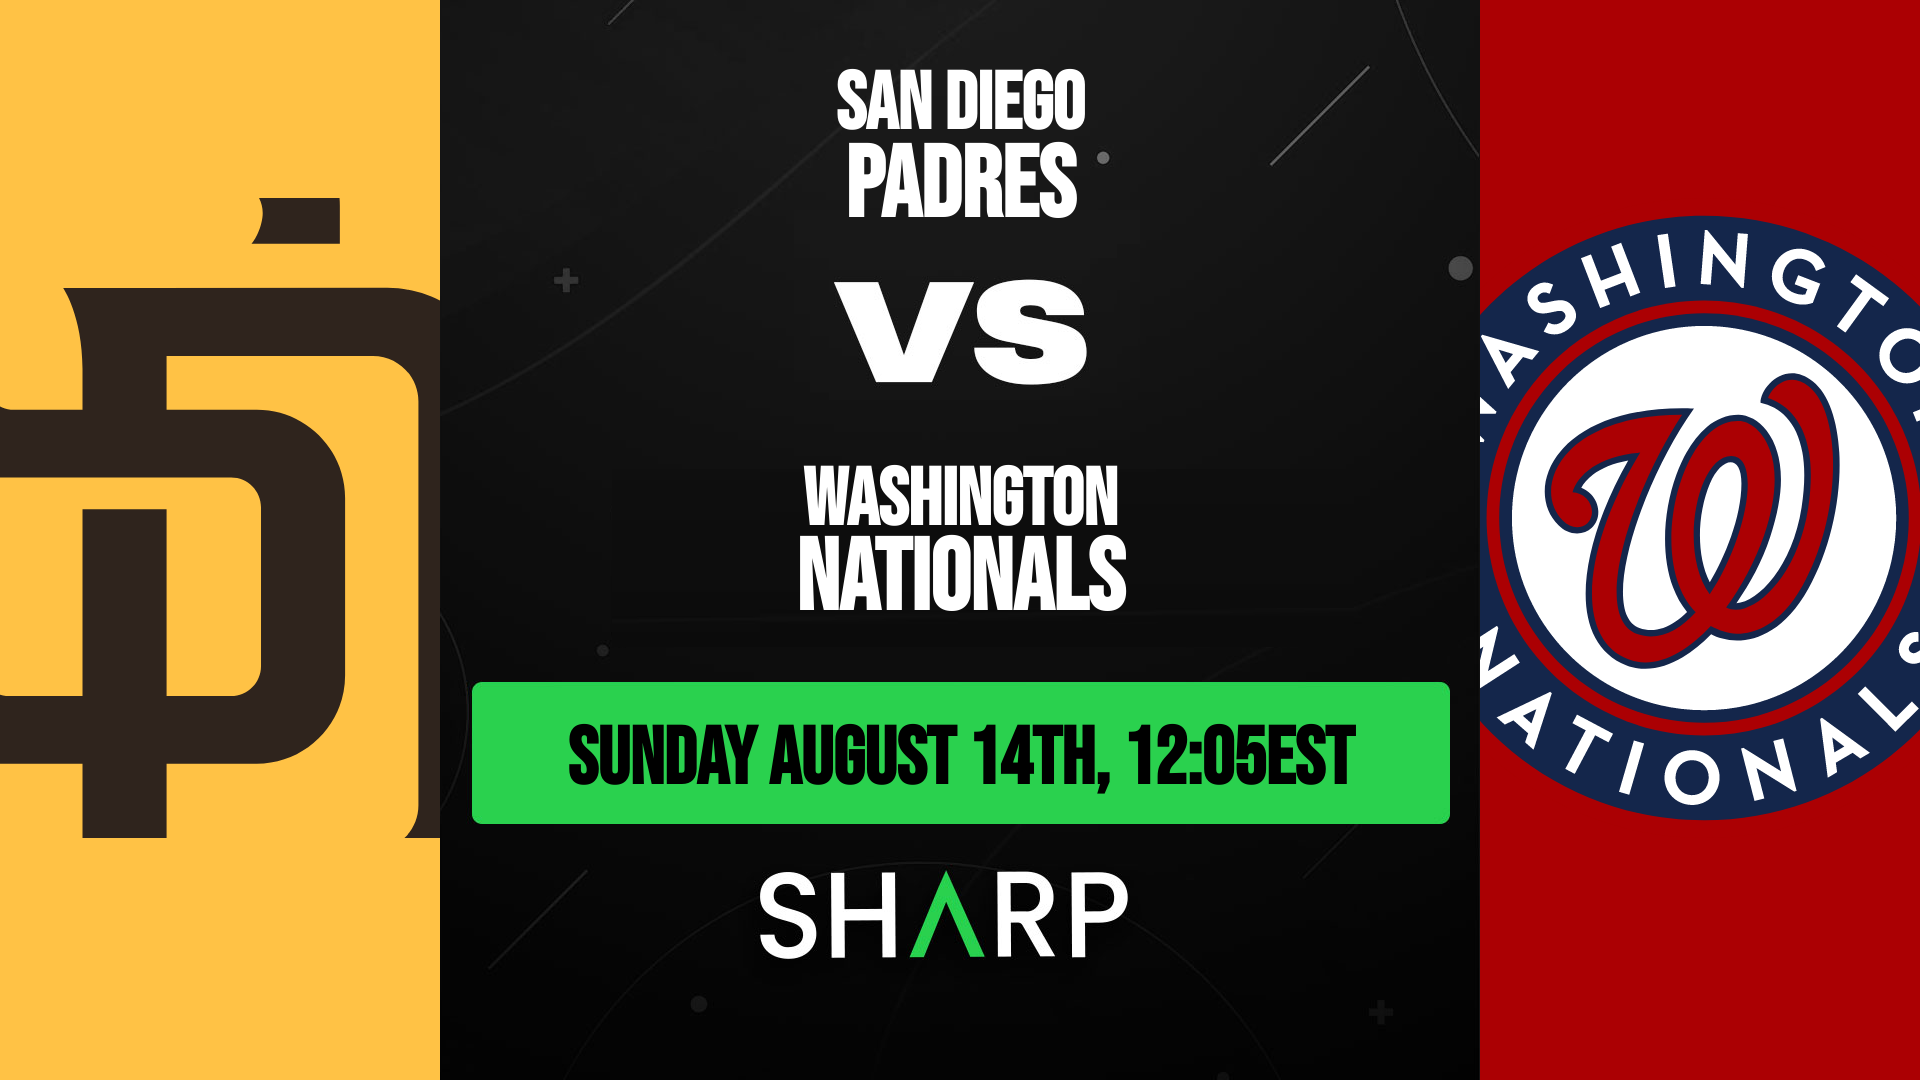 San Diego Padres @ Washington Nationals Matchup Preview - August 14th, 2022